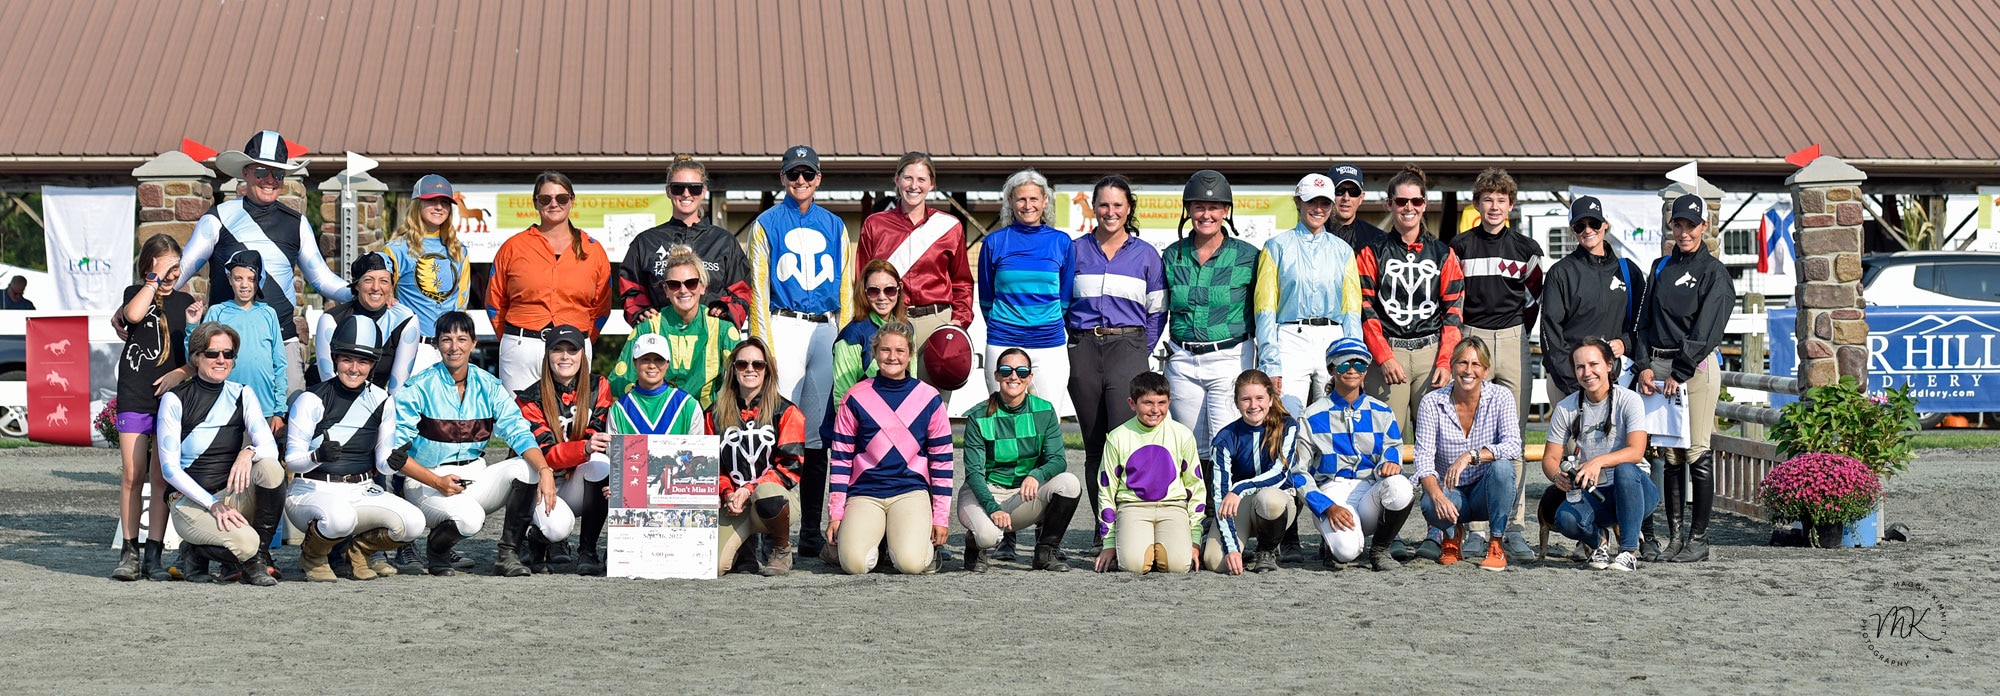 Featured image for “Real Rider Cup Comes Home to Fair Hill, Triples Previous Fundraising Record”